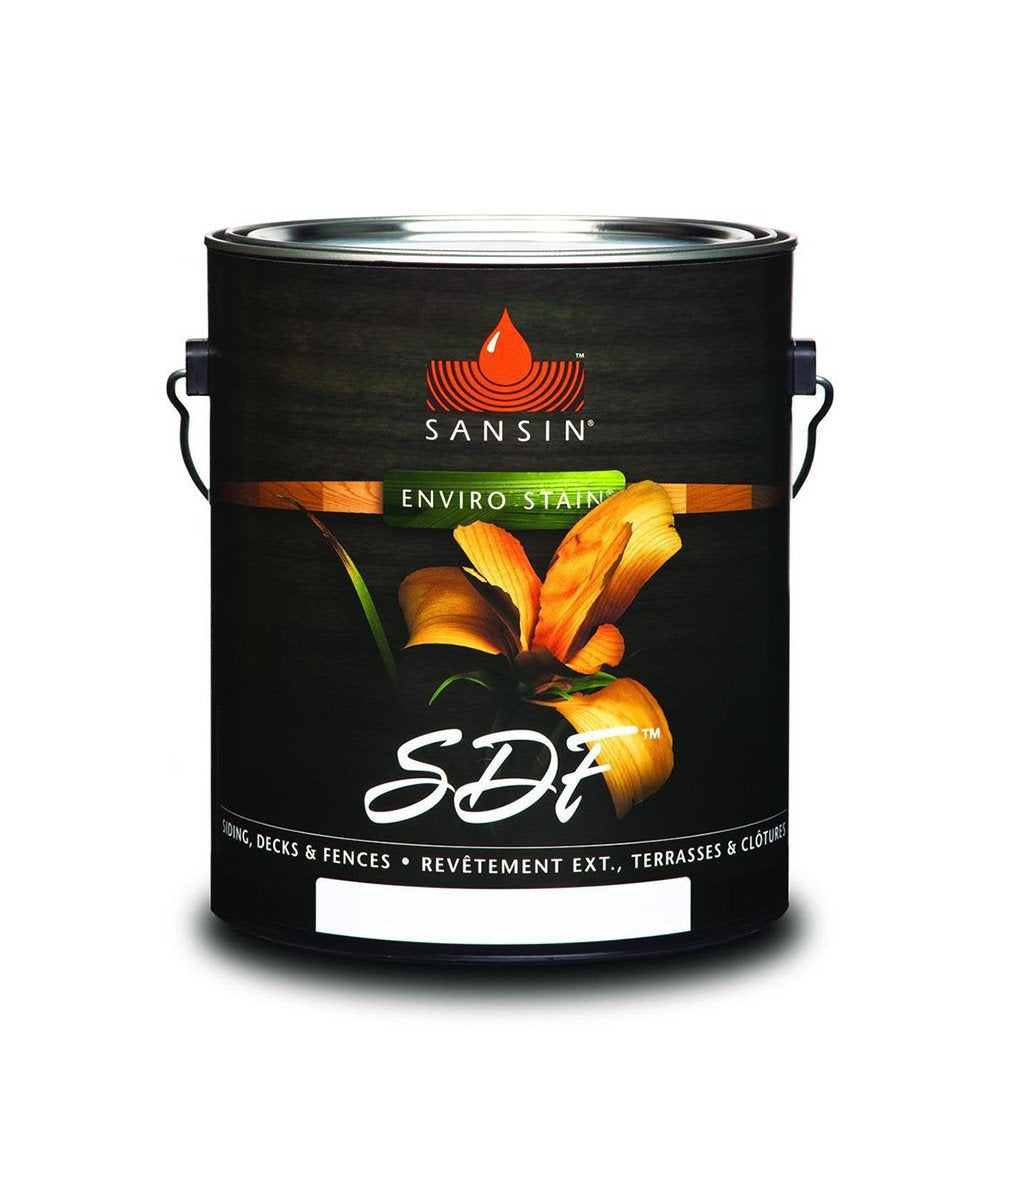 Sansin SDF Top Coat, available at Clement's Paint in Austin, TX.